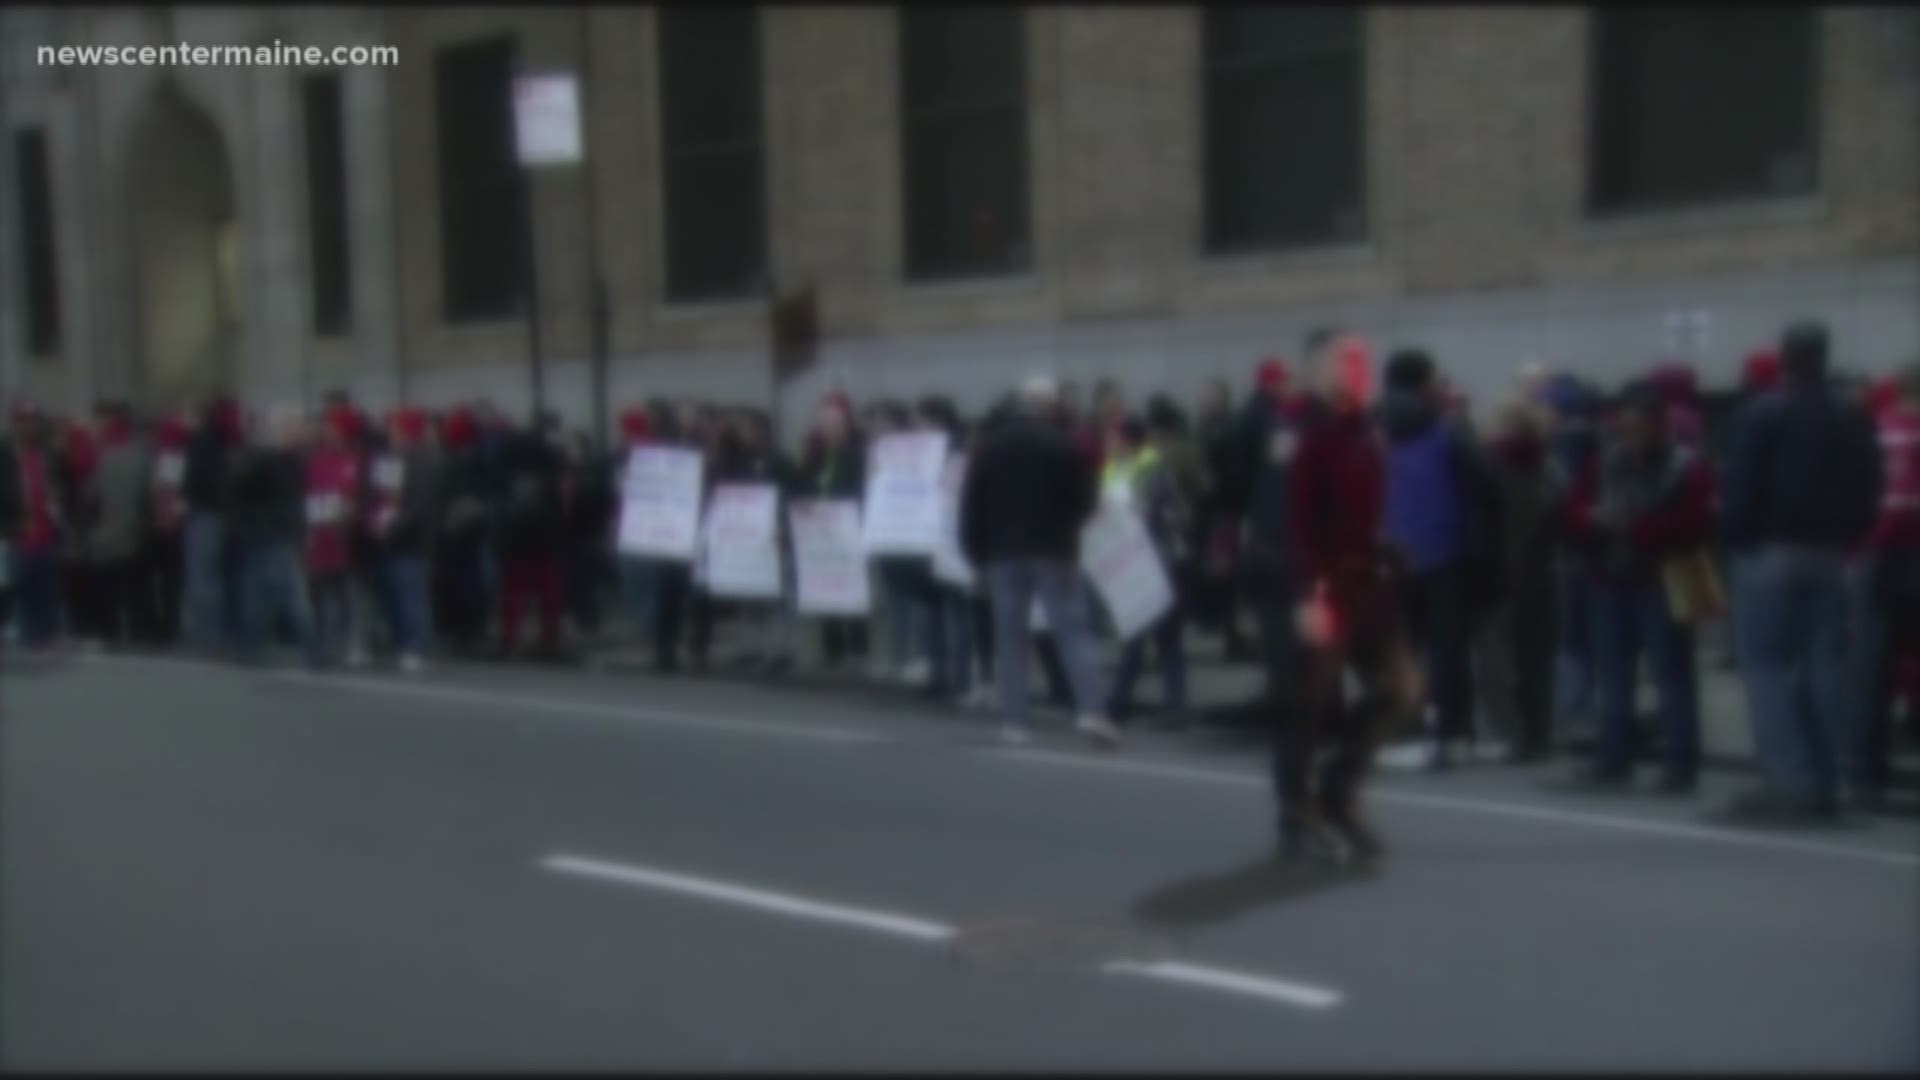 A bill to allow some public workers to strike is advancing in Maine's government.